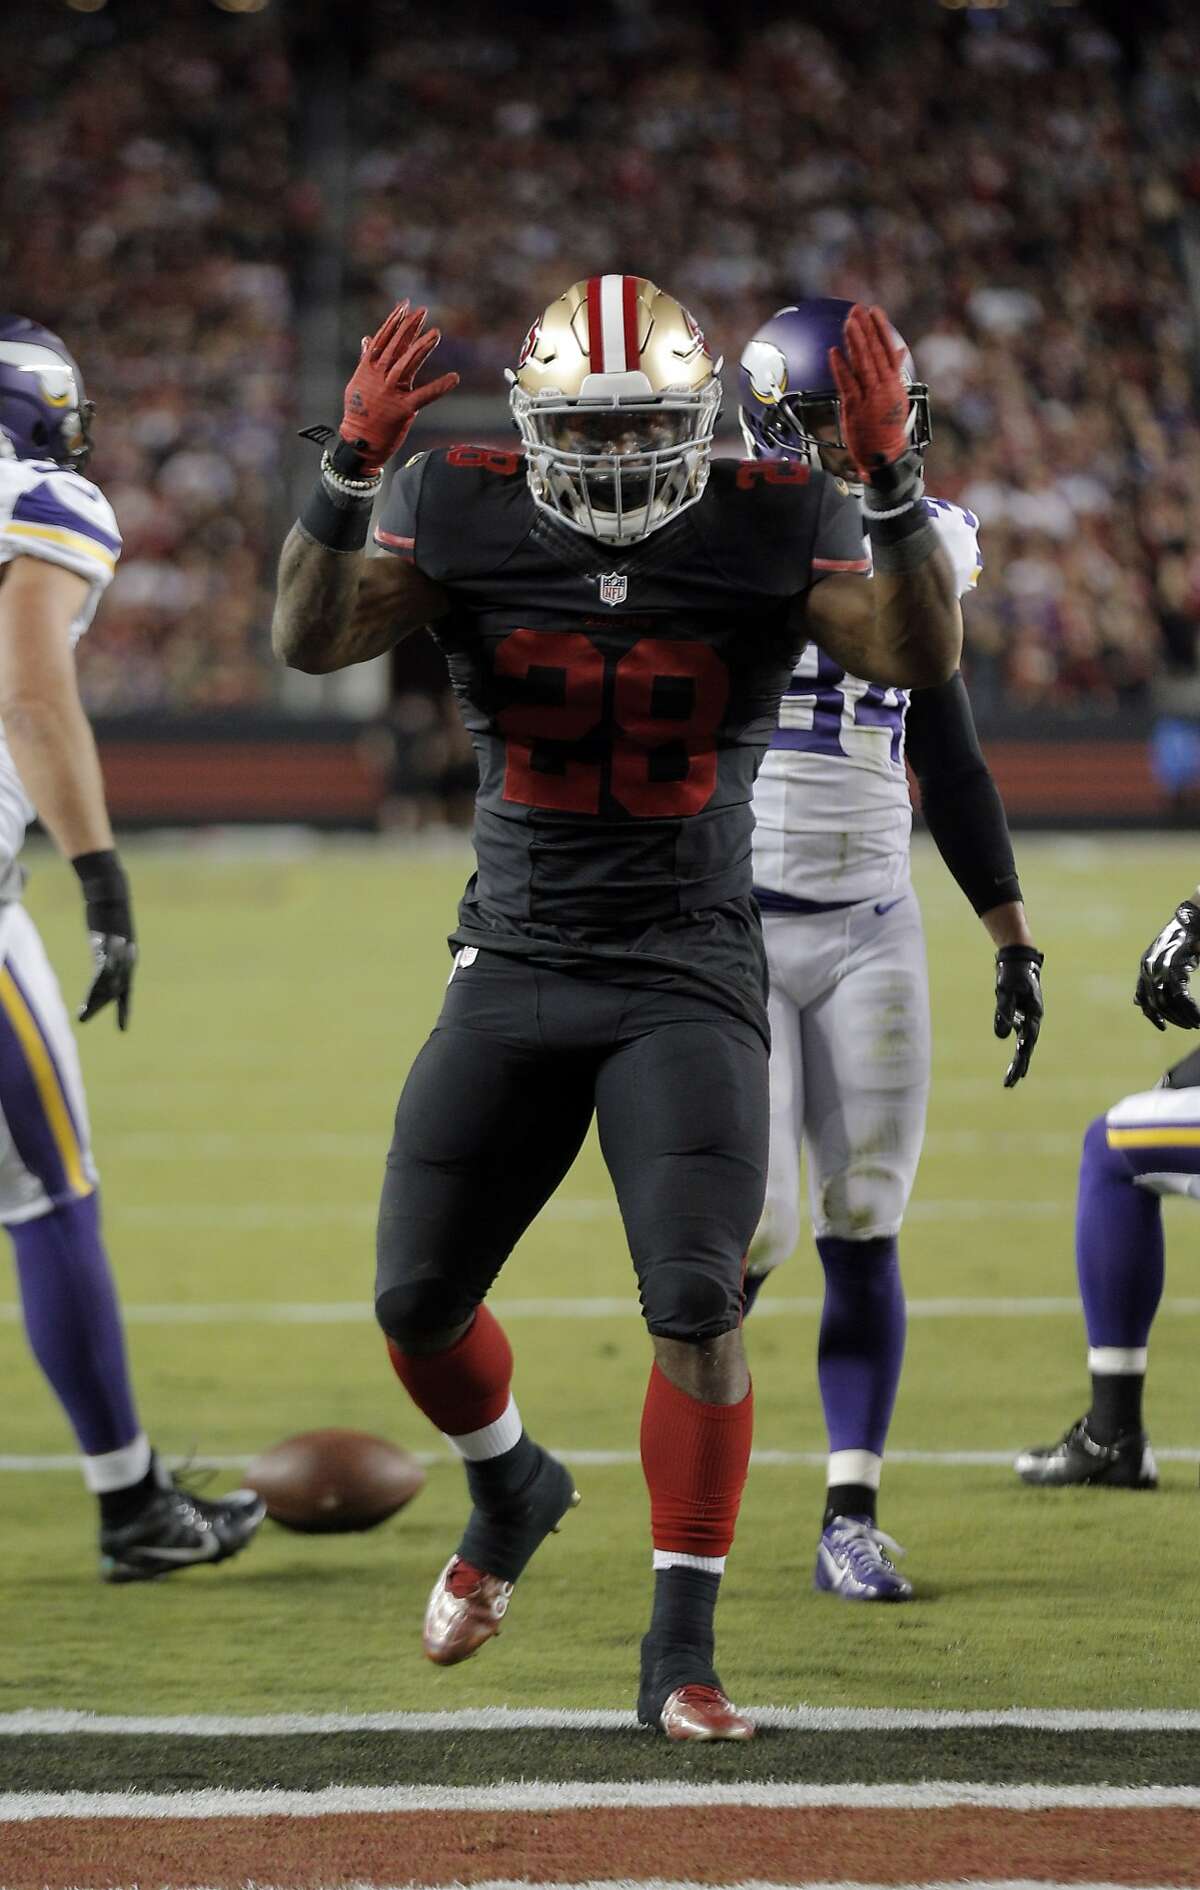 Carlos Hyde (28) reacts after a run that brought the 49ers to within yards of the end zone in the first quarter during the 49ers game against the Minnesota Vikings at Levi's Stadium in Santa Clara, Calif., on Monday, September 14, 2015.